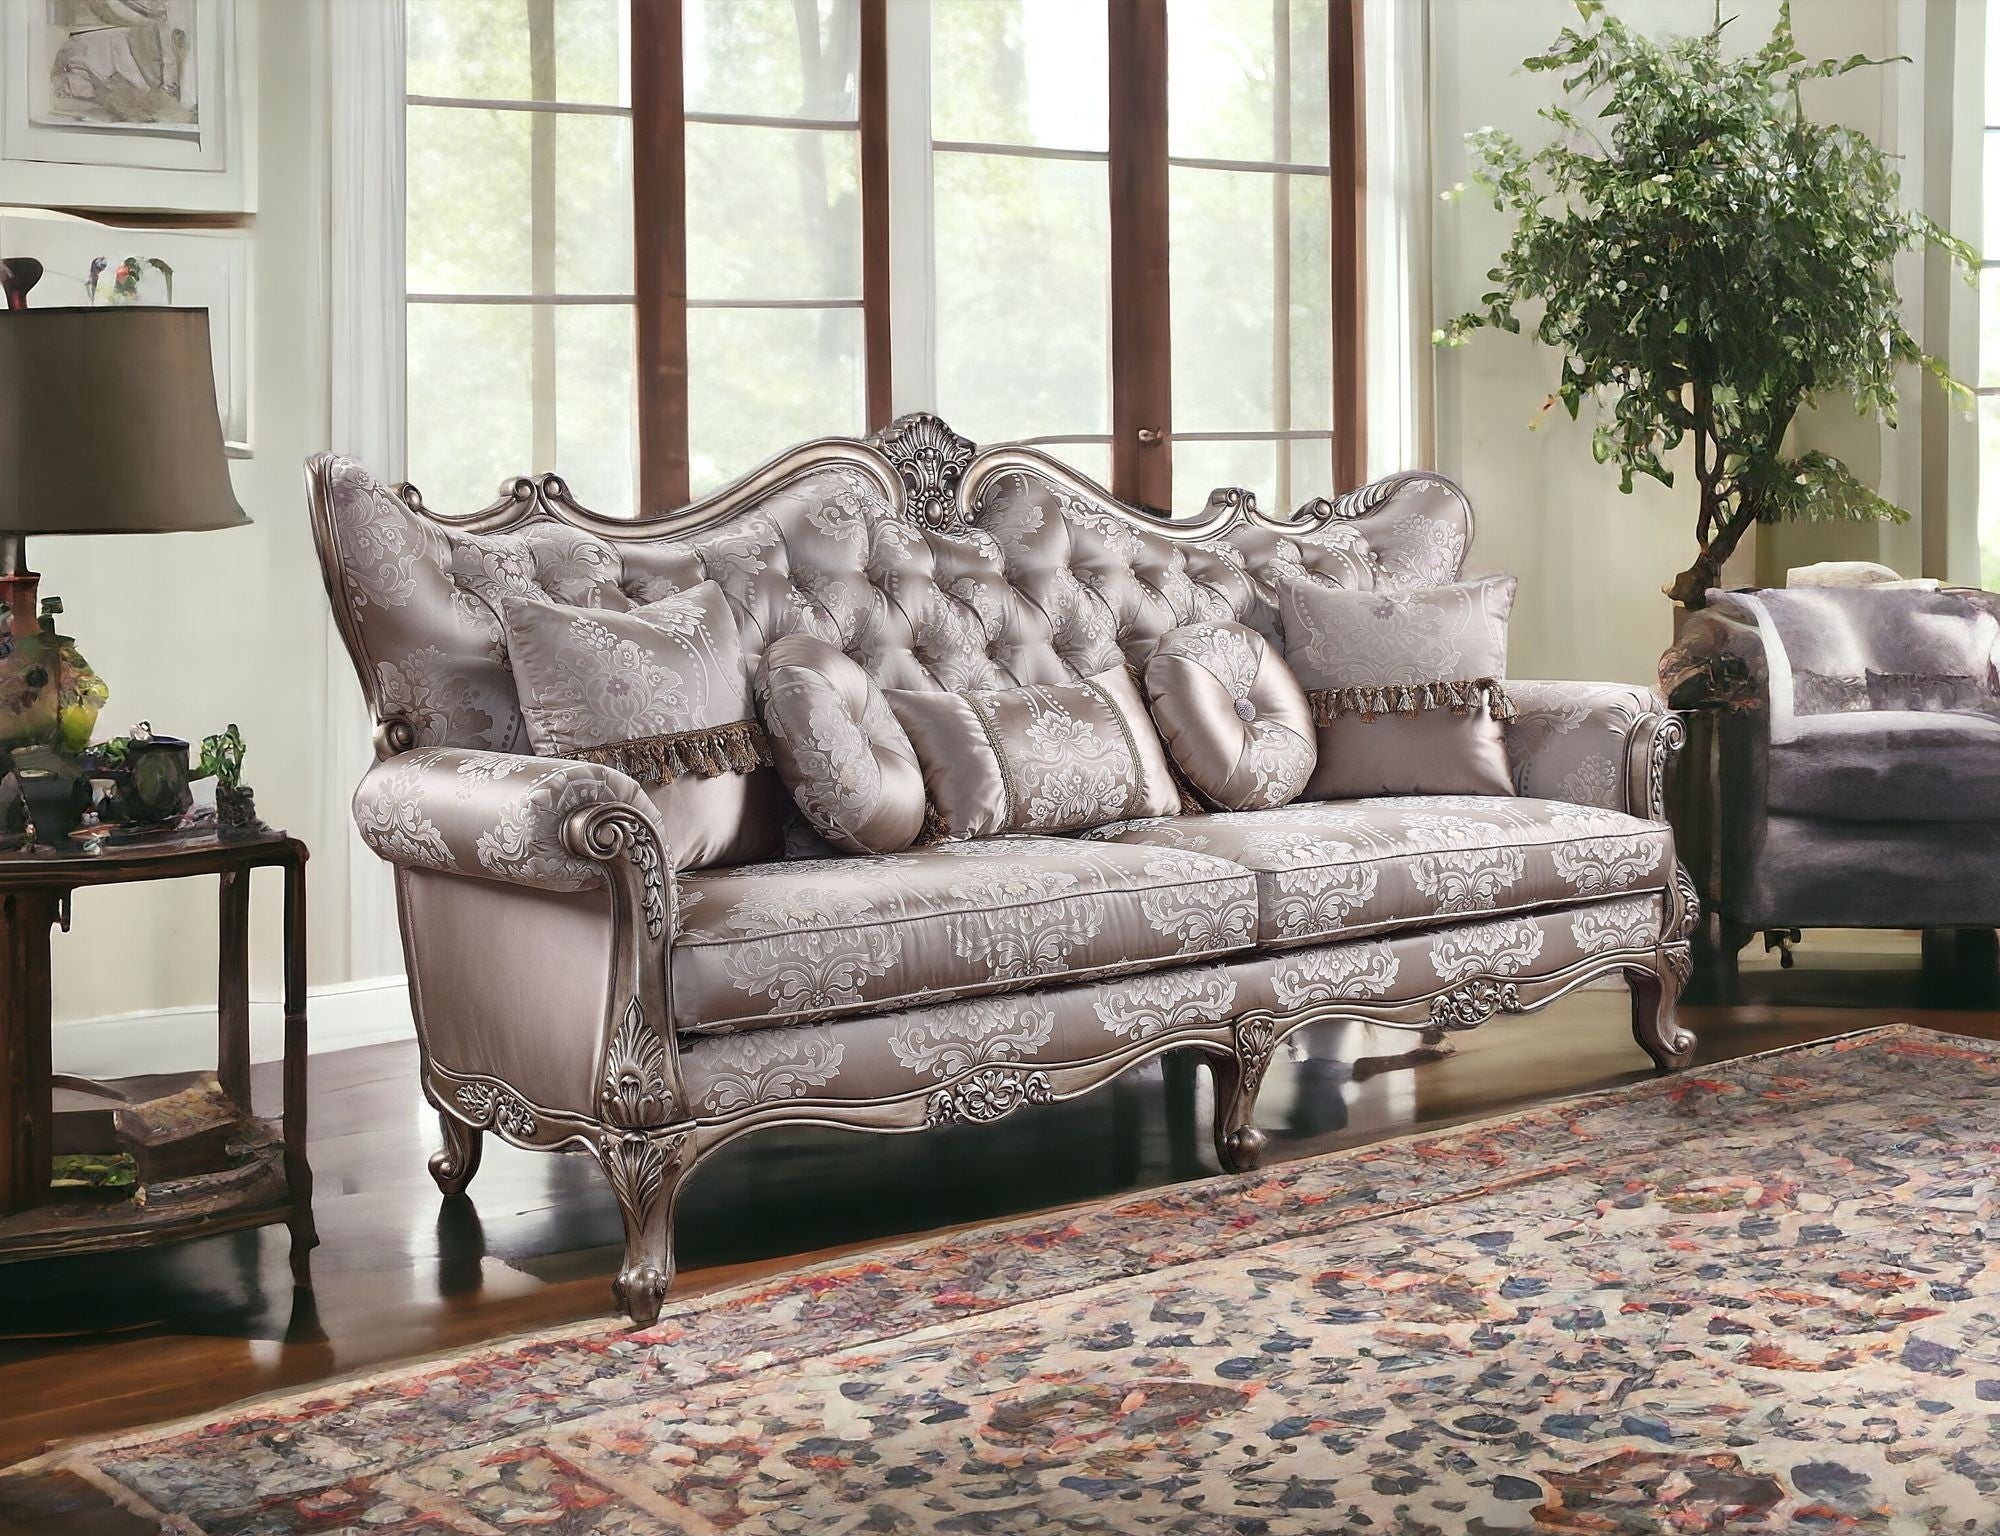 94" Fabric Imitation silk And Champagne Sofa With Five Toss Pillows